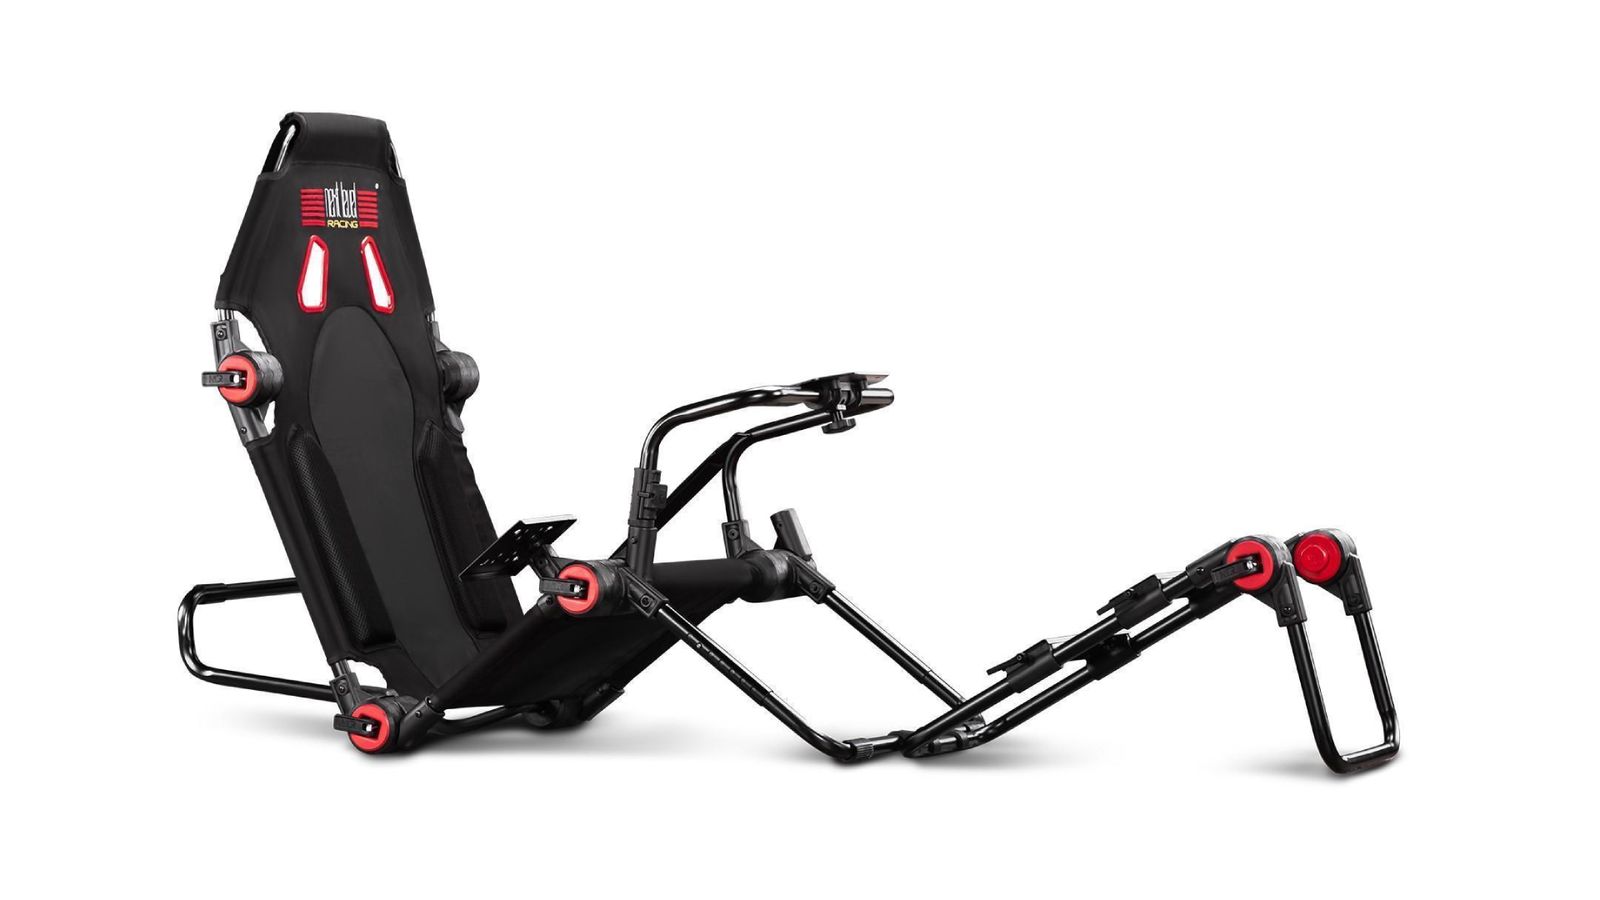 Next Level Racing F-GT Lite product image of a black racing cockpit with red accents,